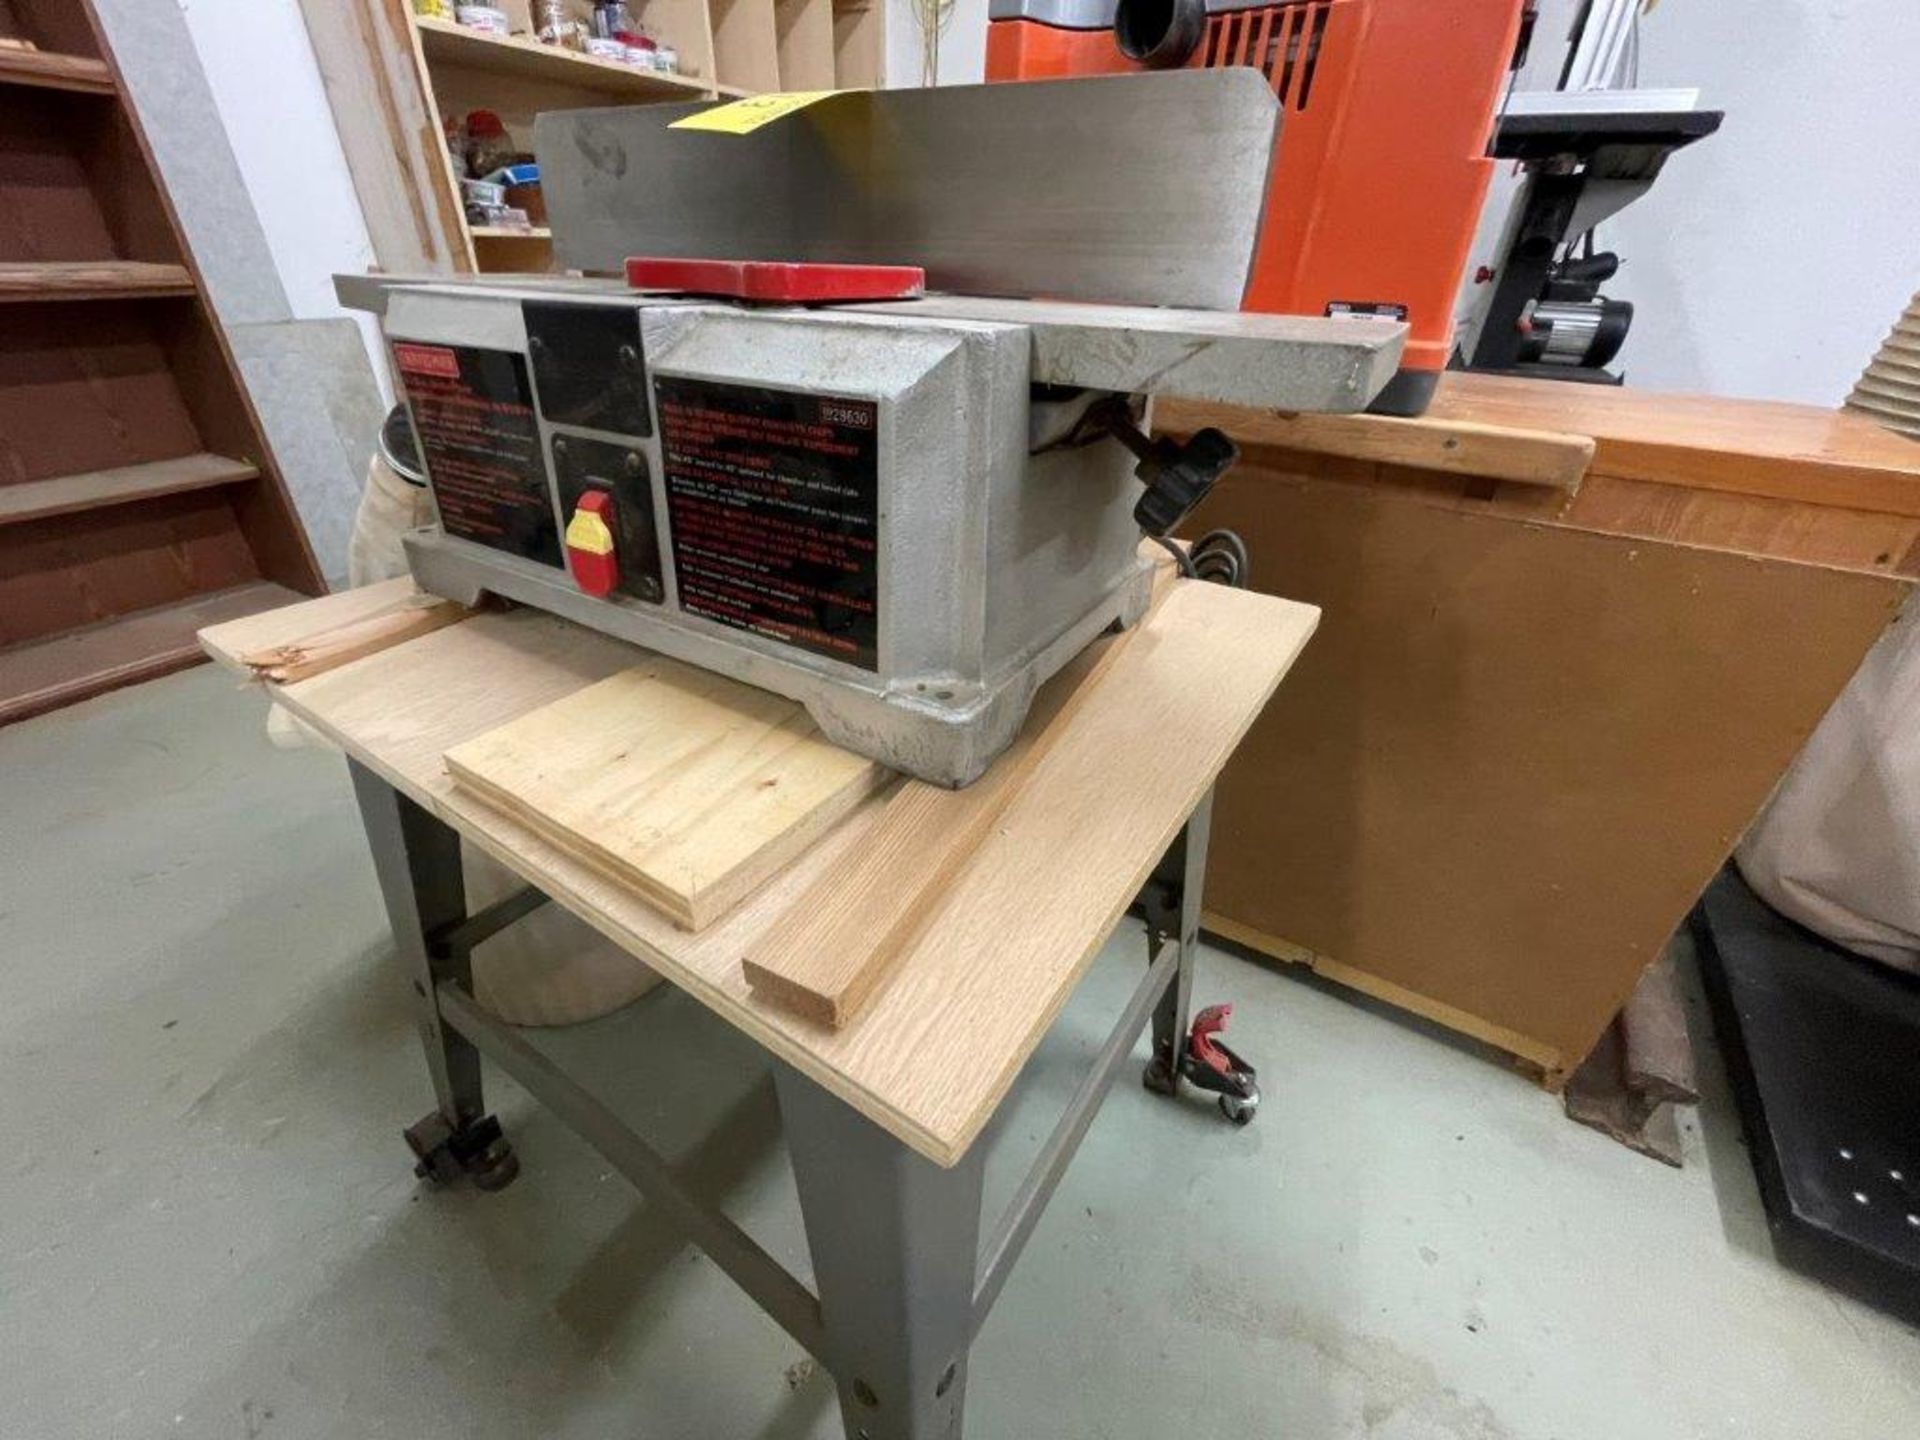 CRAFTSMAN 6-1/8IN BENCH TOP JOINTER/PLANER MOD. 351.286301 - Image 3 of 5